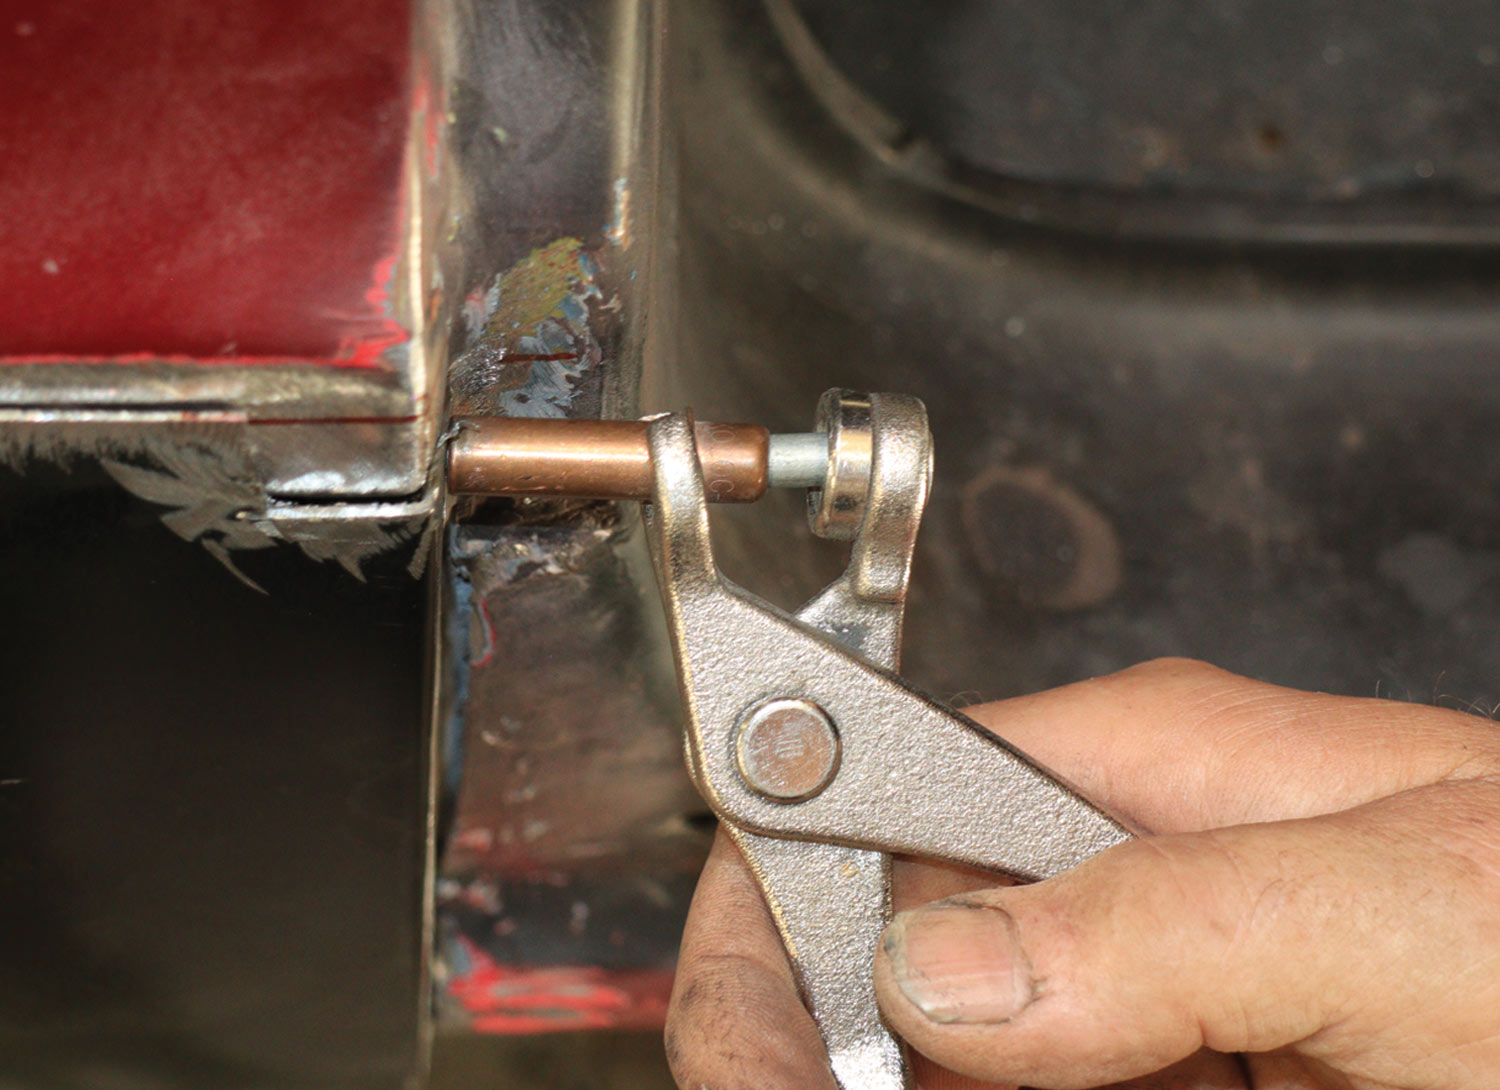 mechanic inserts a butt weld clamp in a cut made at the doorjamb